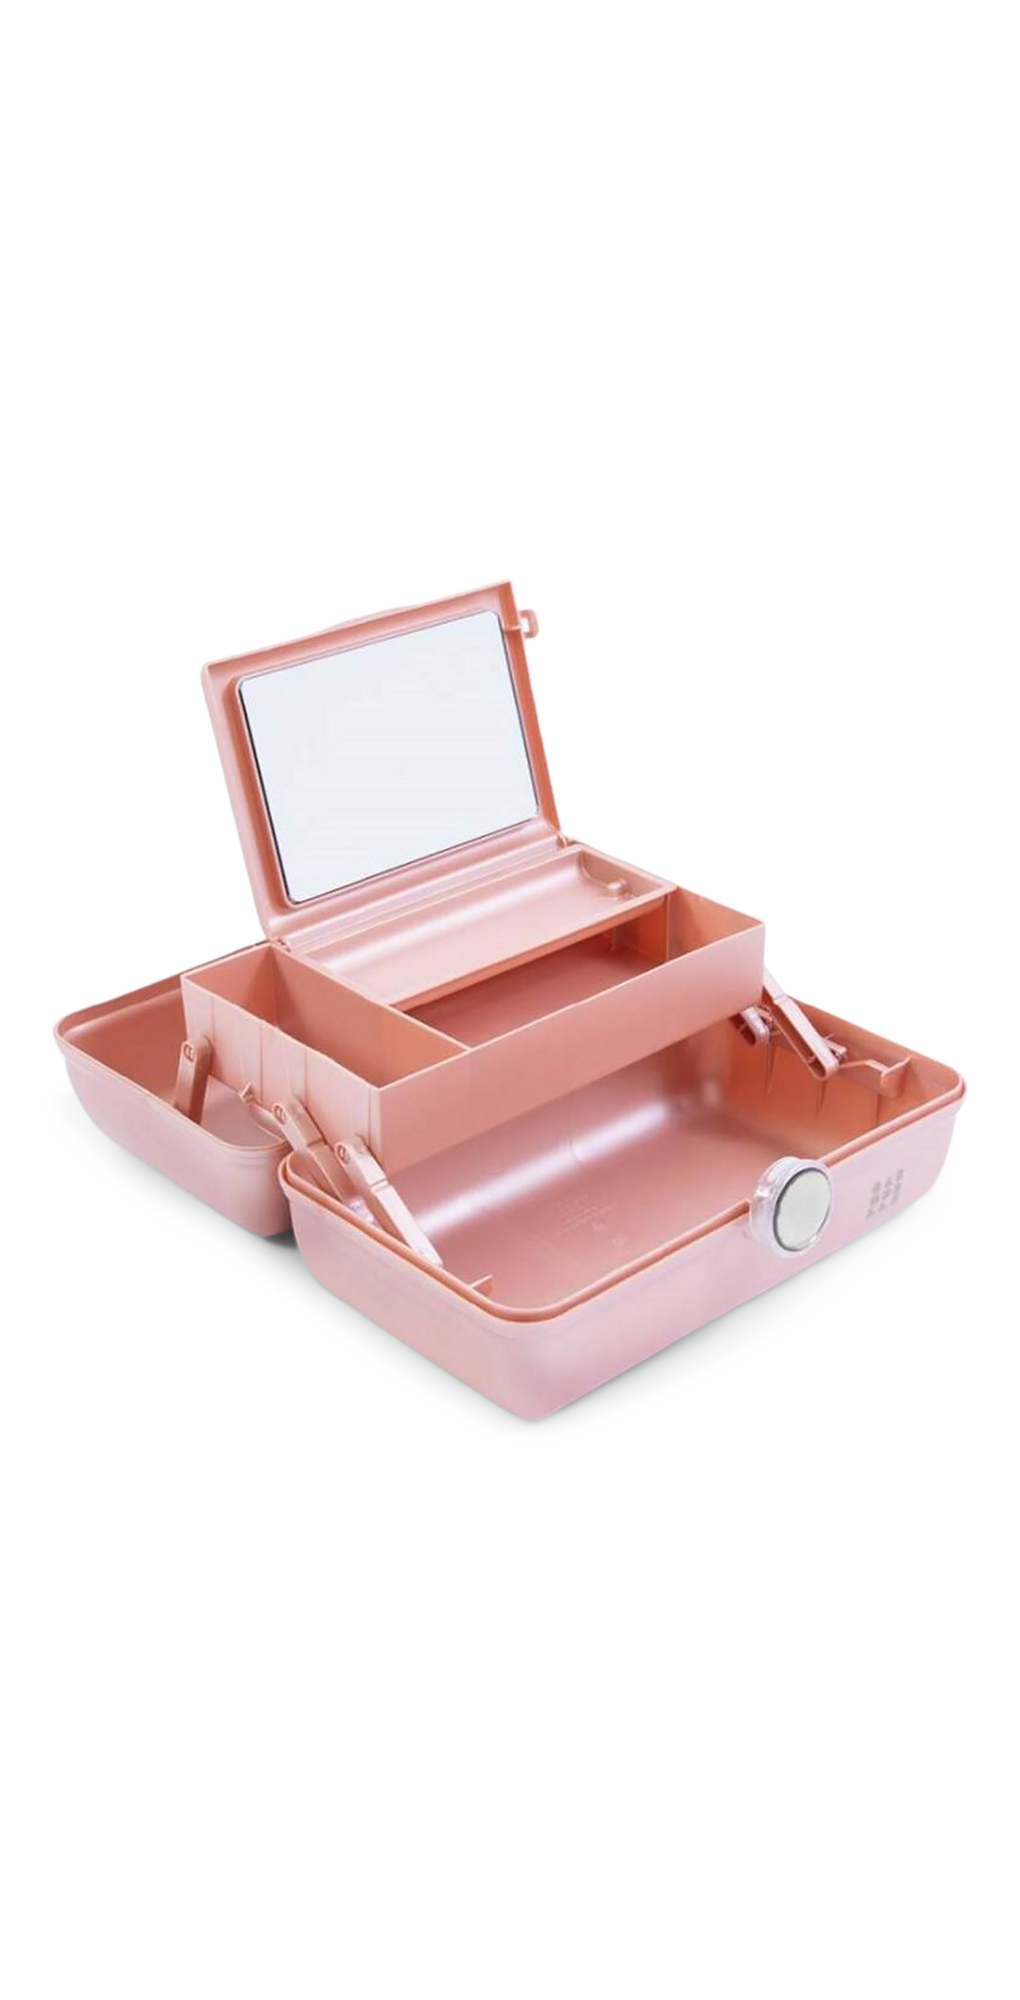 Caboodles On The Go Girl Makeup Case, Rose Gold